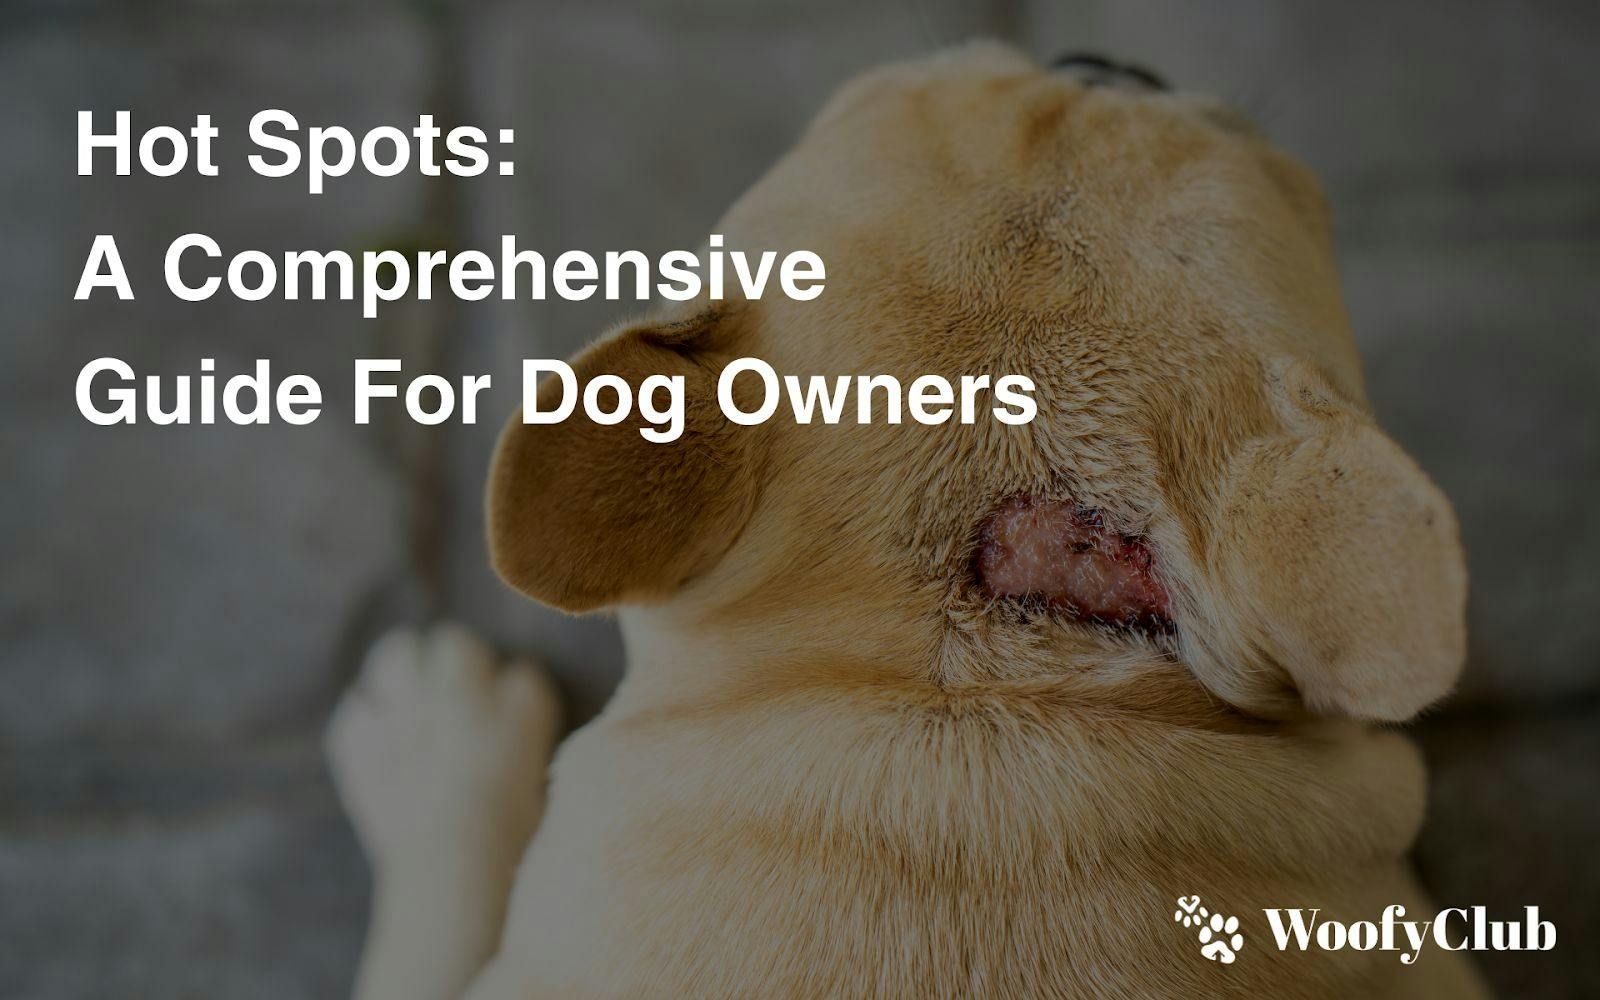 Hot Spots: A Comprehensive Guide For Dog Owners